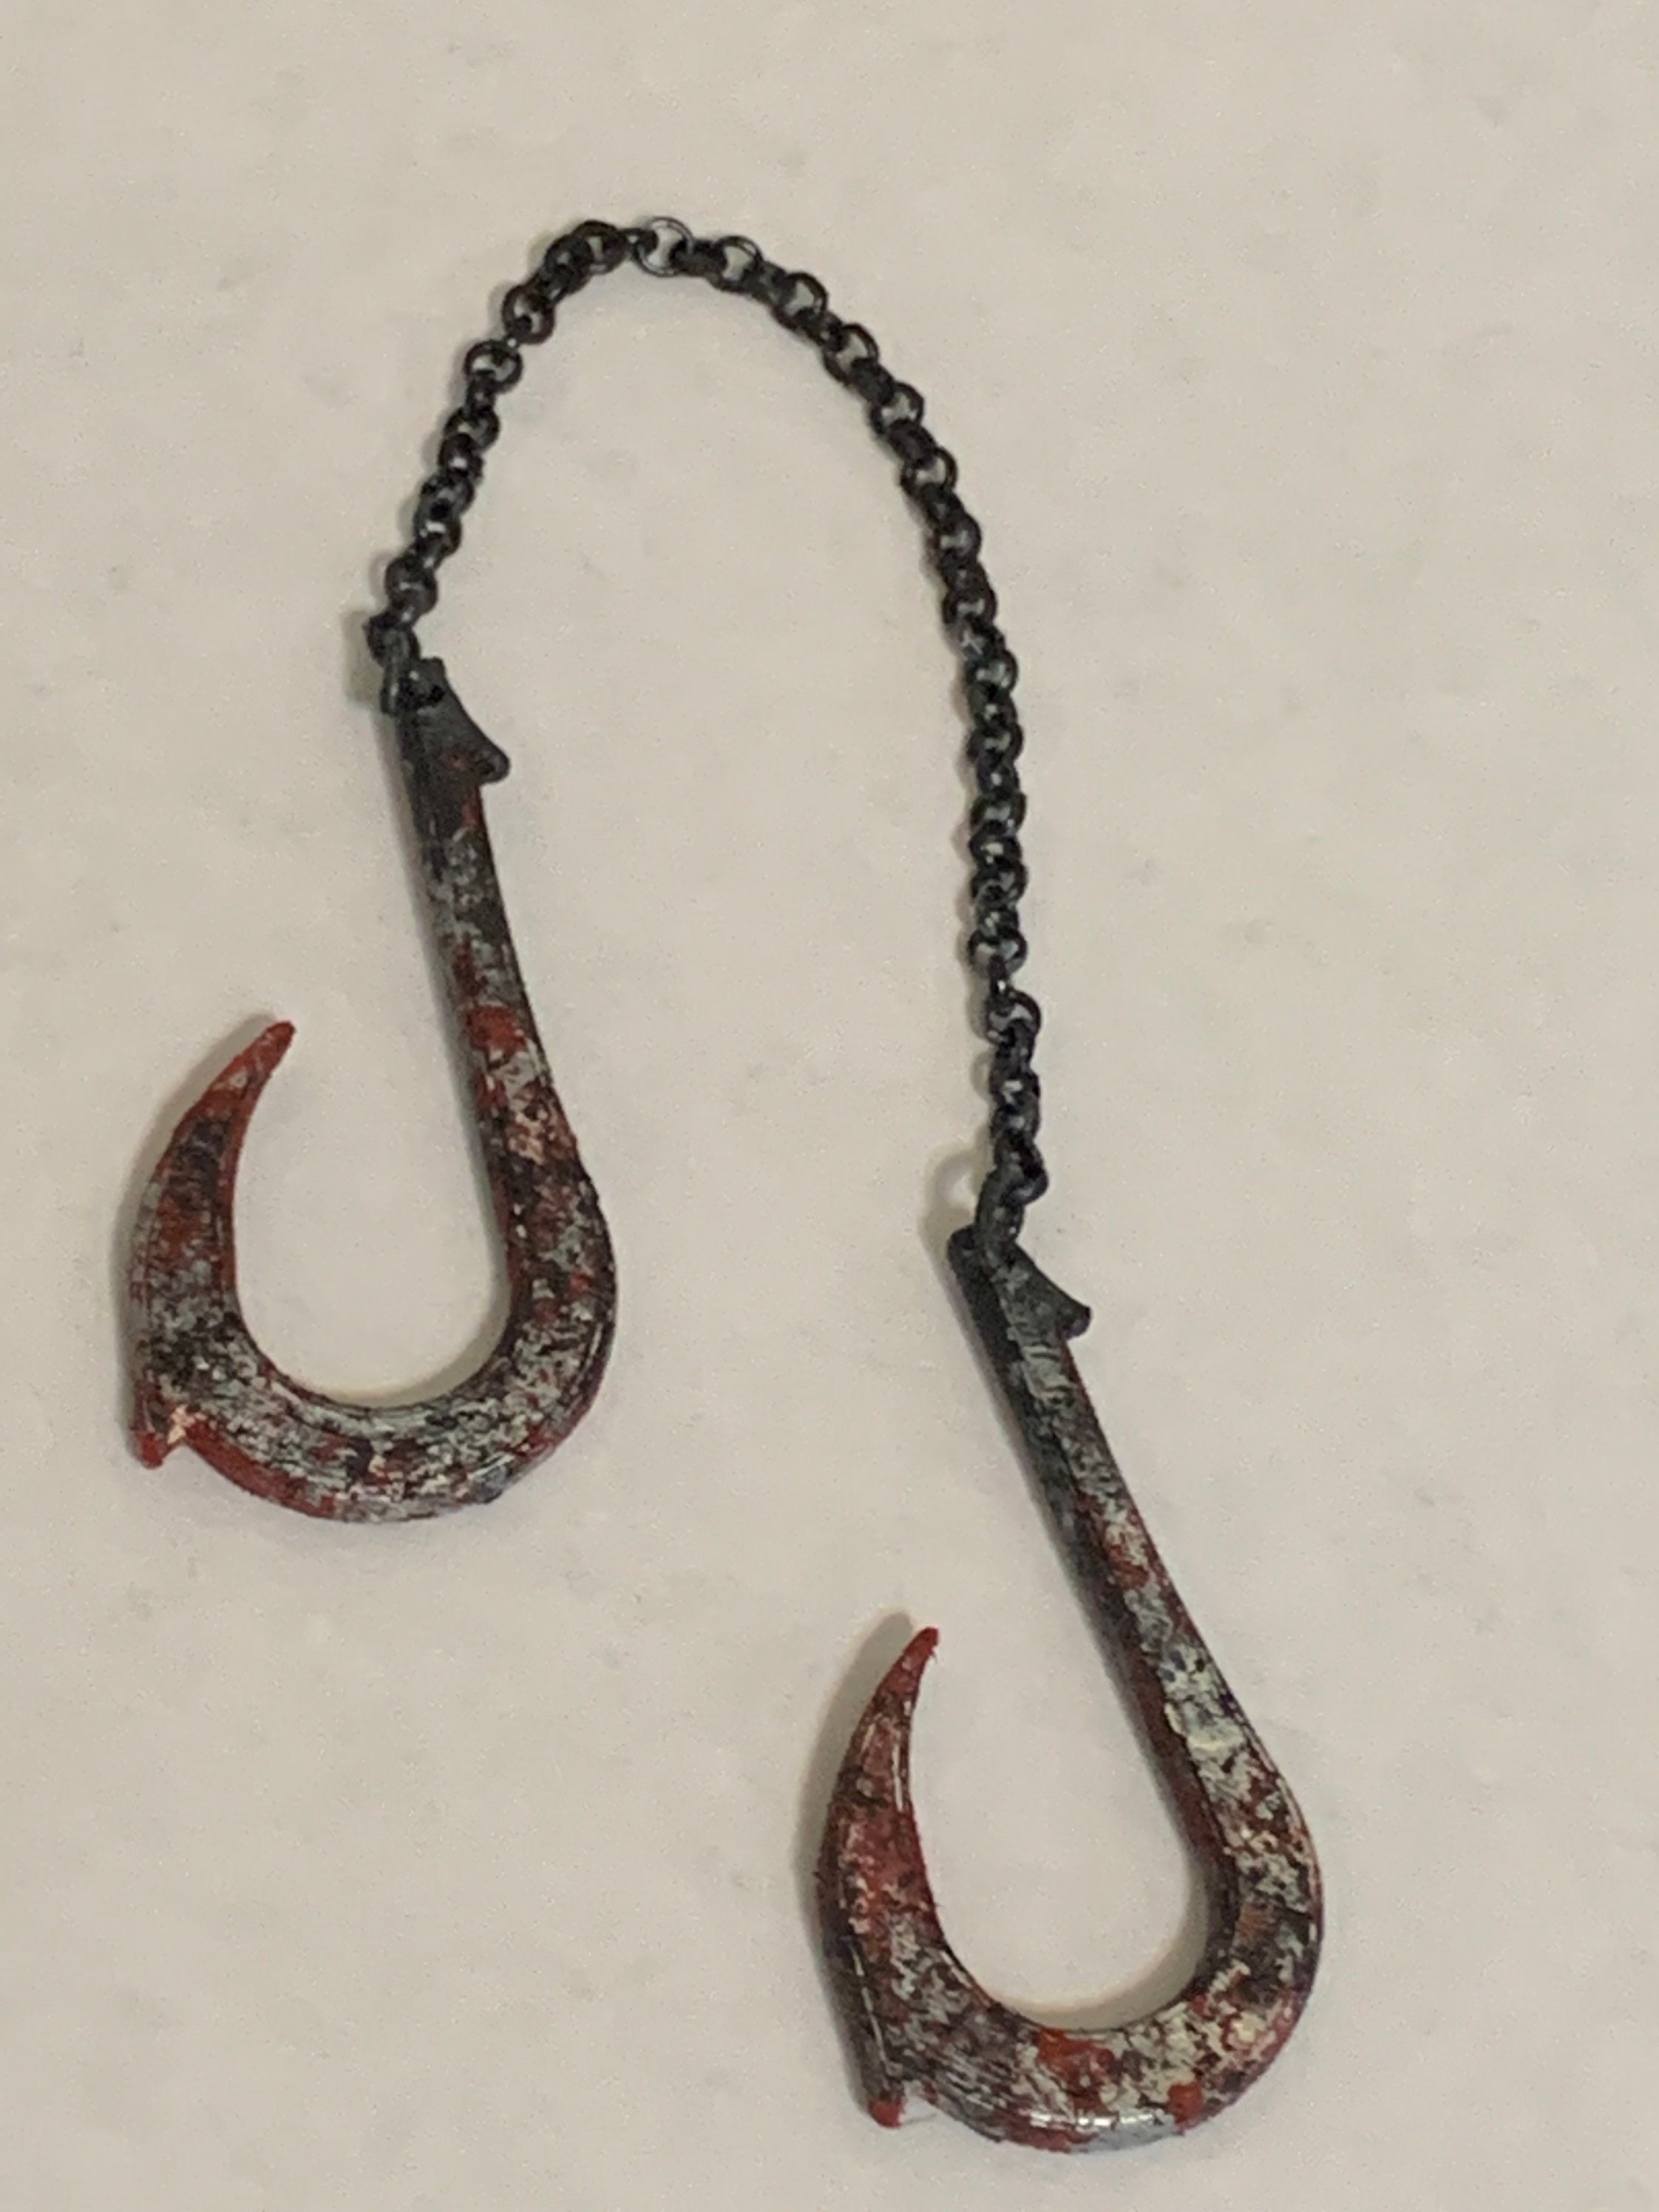 Fish Hook Torture Chain Weapon Miniature 1:12 Scale for Action